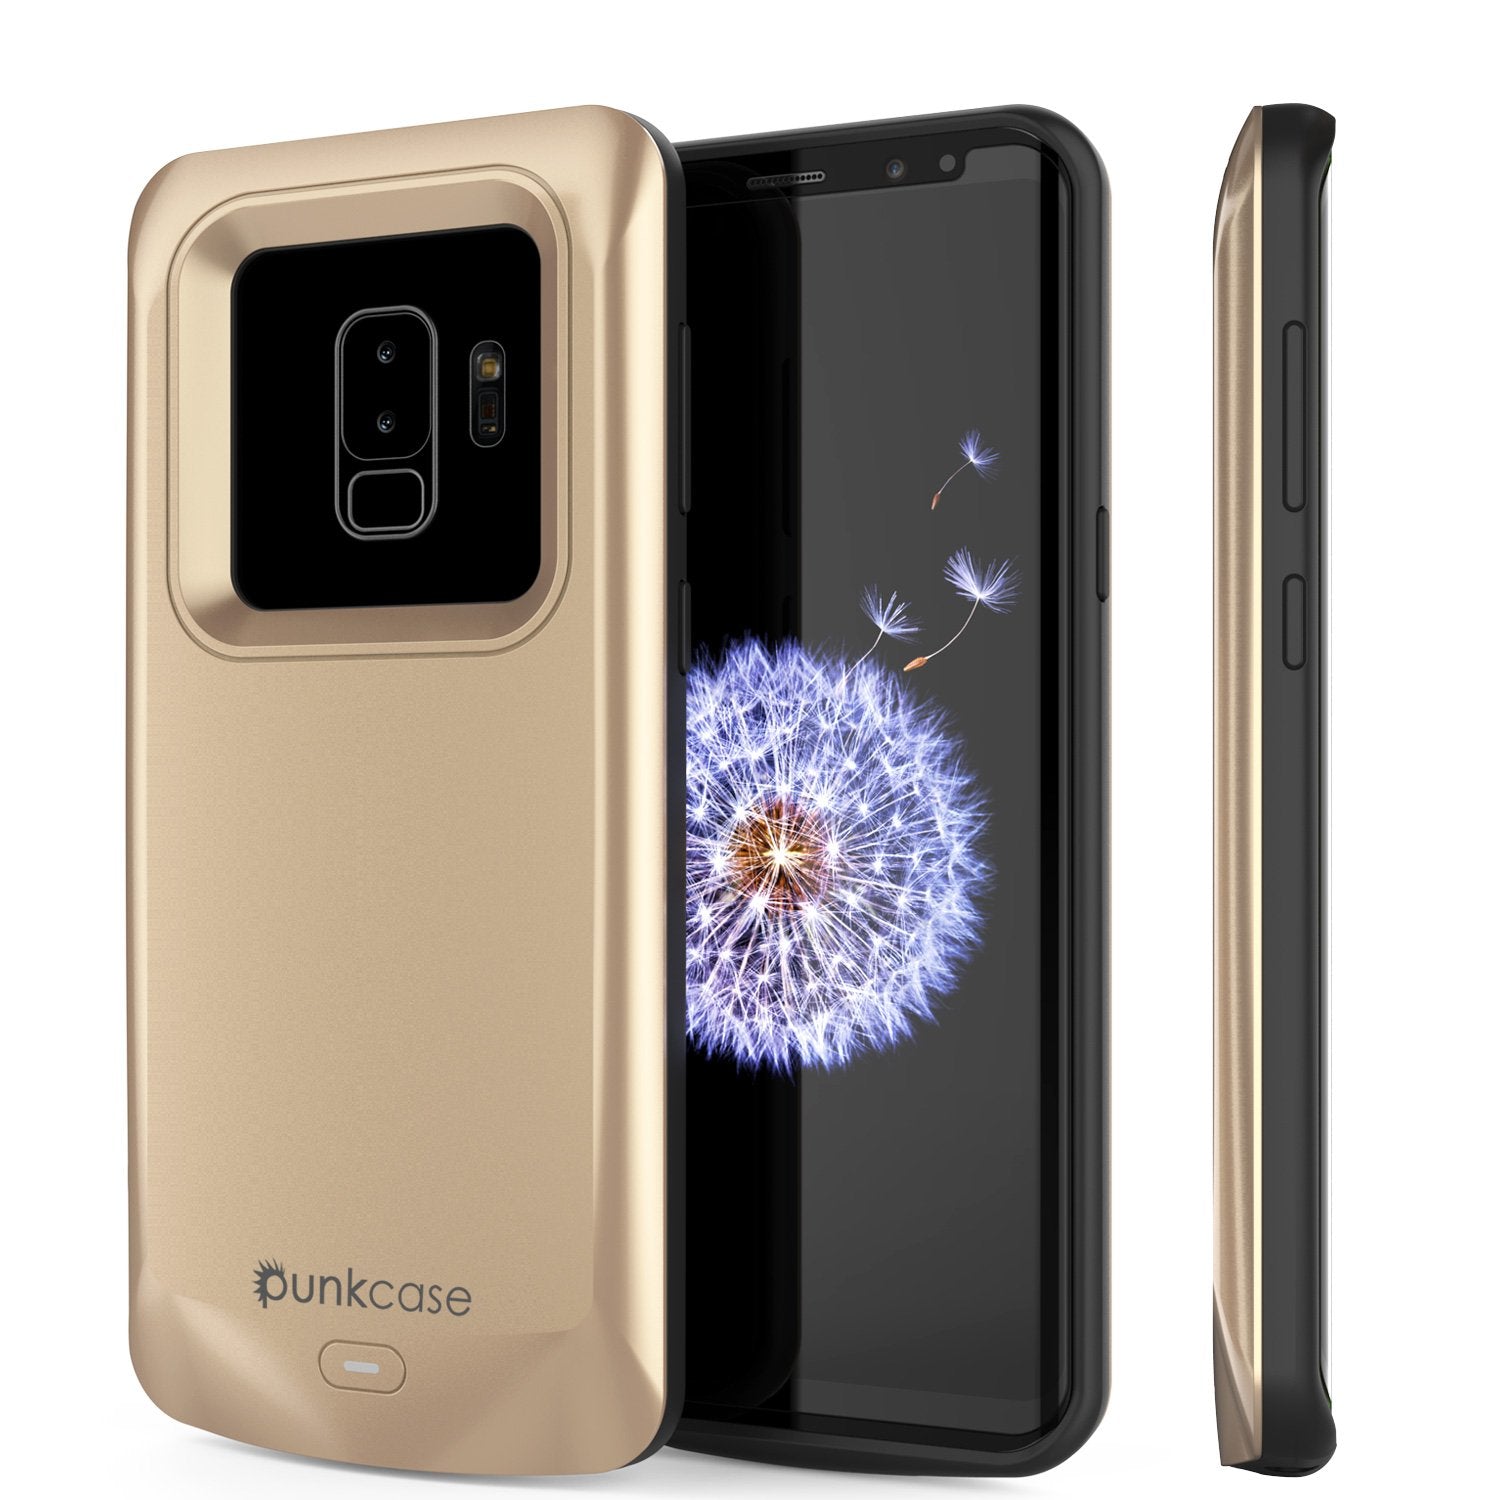 Galaxy S9 PLUS Battery Case, PunkJuice 5000mAH Fast Charging Power Bank W/ Screen Protector | Integrated USB Port | IntelSwitch | Slim, Secure and Reliable | Suitable for Samsung Galaxy S9+ [Gold]